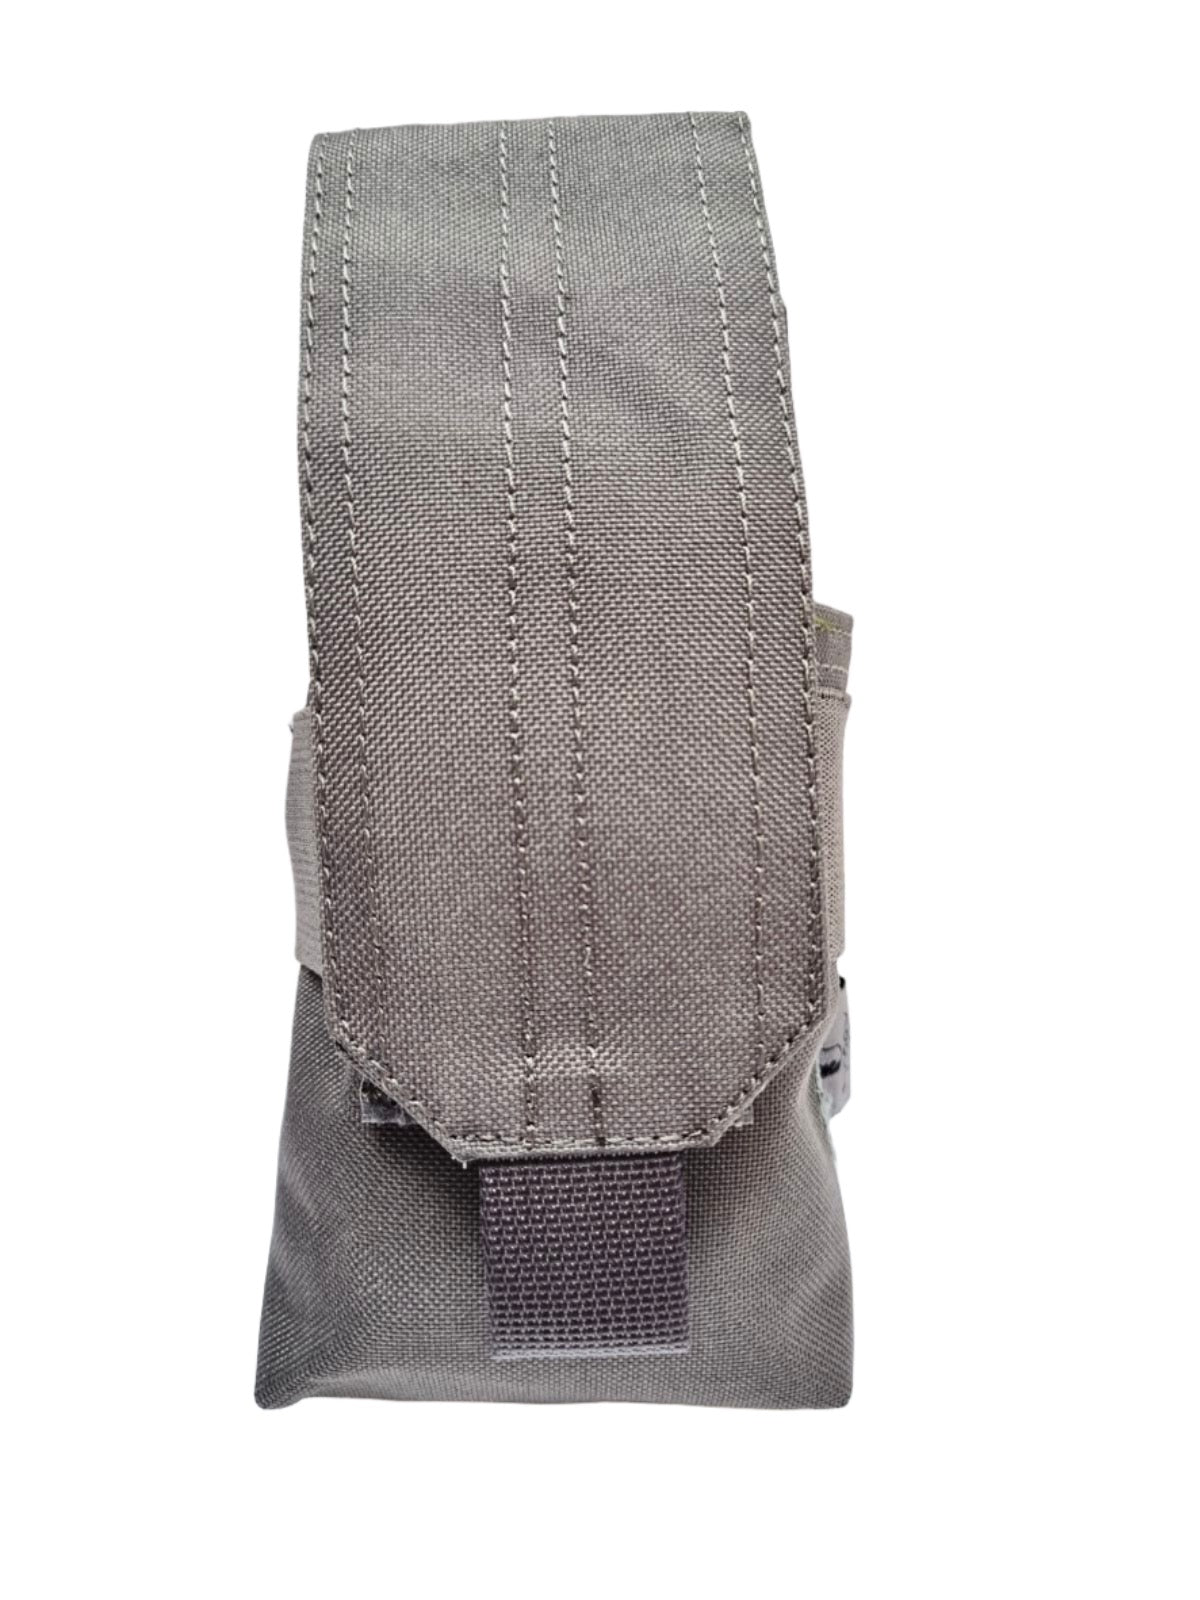 SHE-920 SINGLE M4 5.56MM MAG POUCH COLOR LIGHT GREY